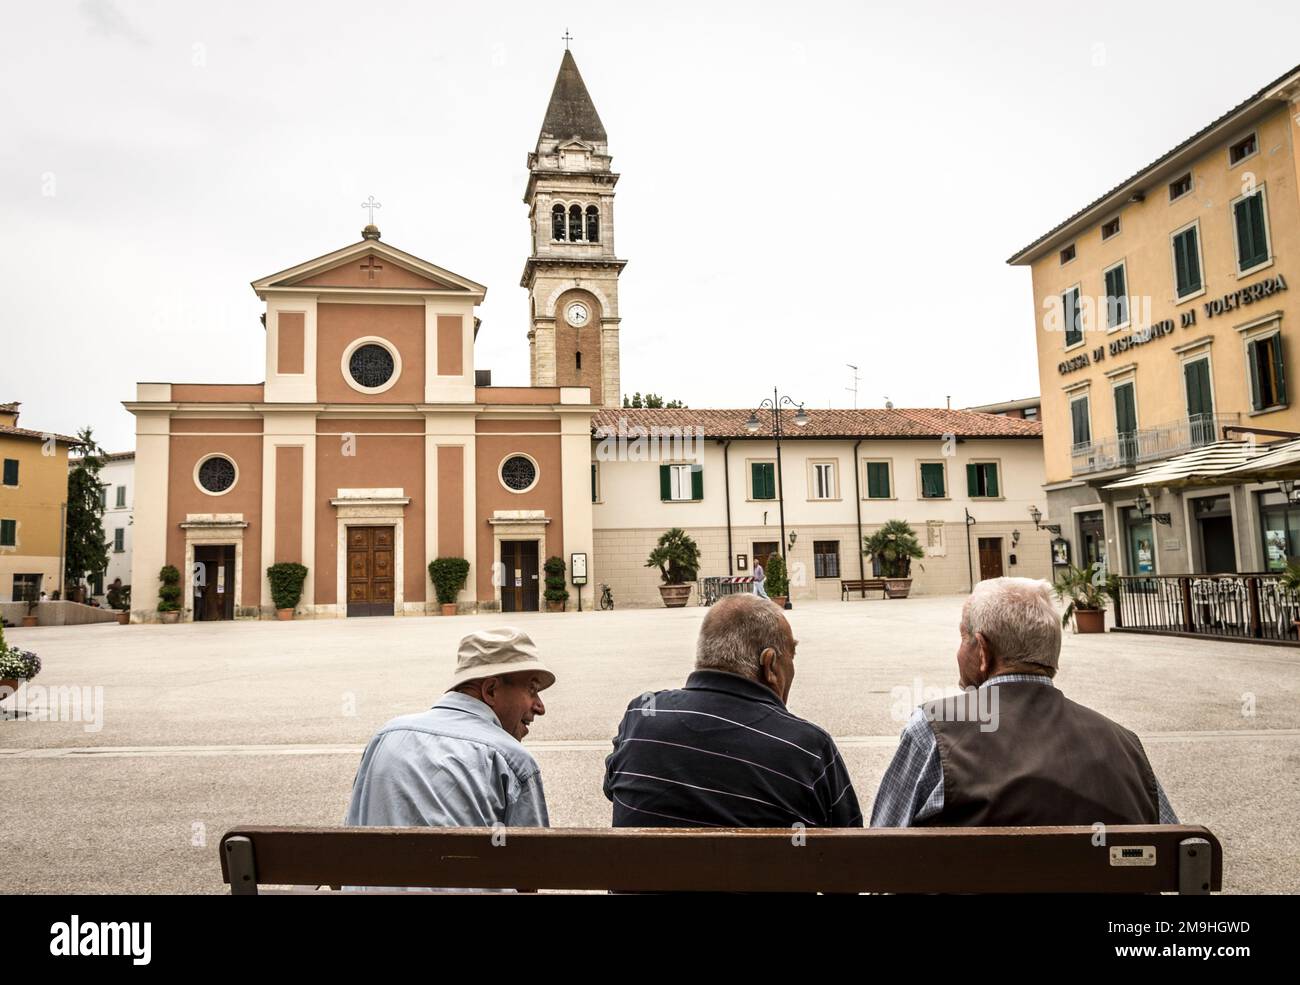 Men chatting in a town square in Tuscany Stock Photo